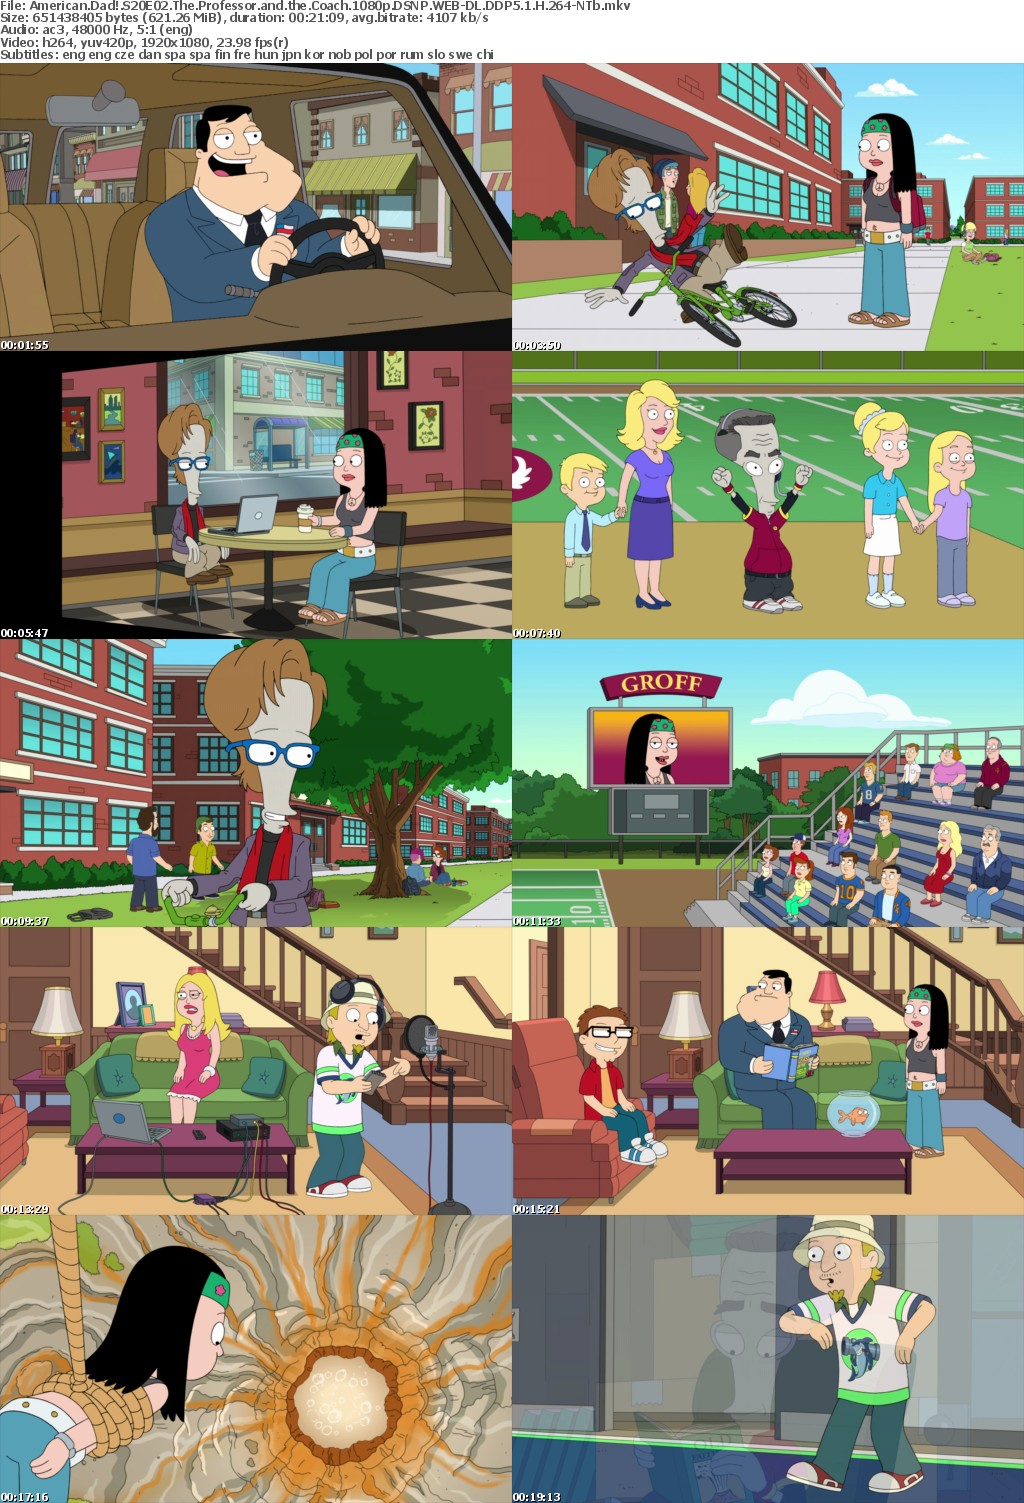 American Dad! S20E02 The Professor and the Coach 1080p DSNP WEB-DL DDP5 1 H 264-NTb